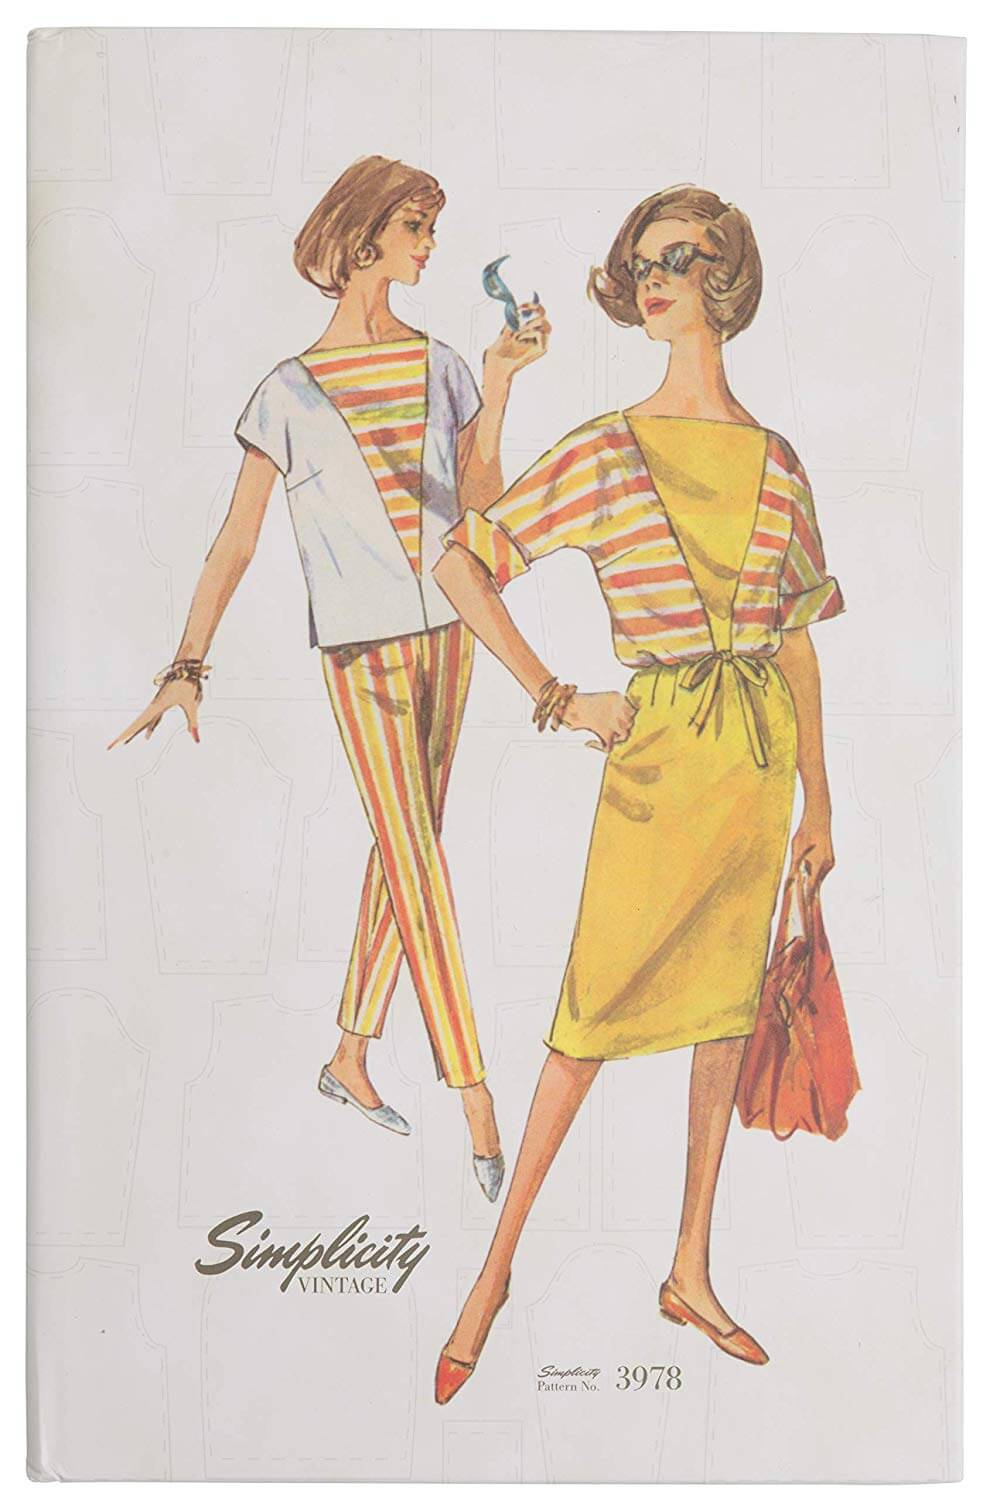 SIMPLICITY VINTAGE HARDCOVER LINED NOTEBOOK - PATTERNS 3481 3978